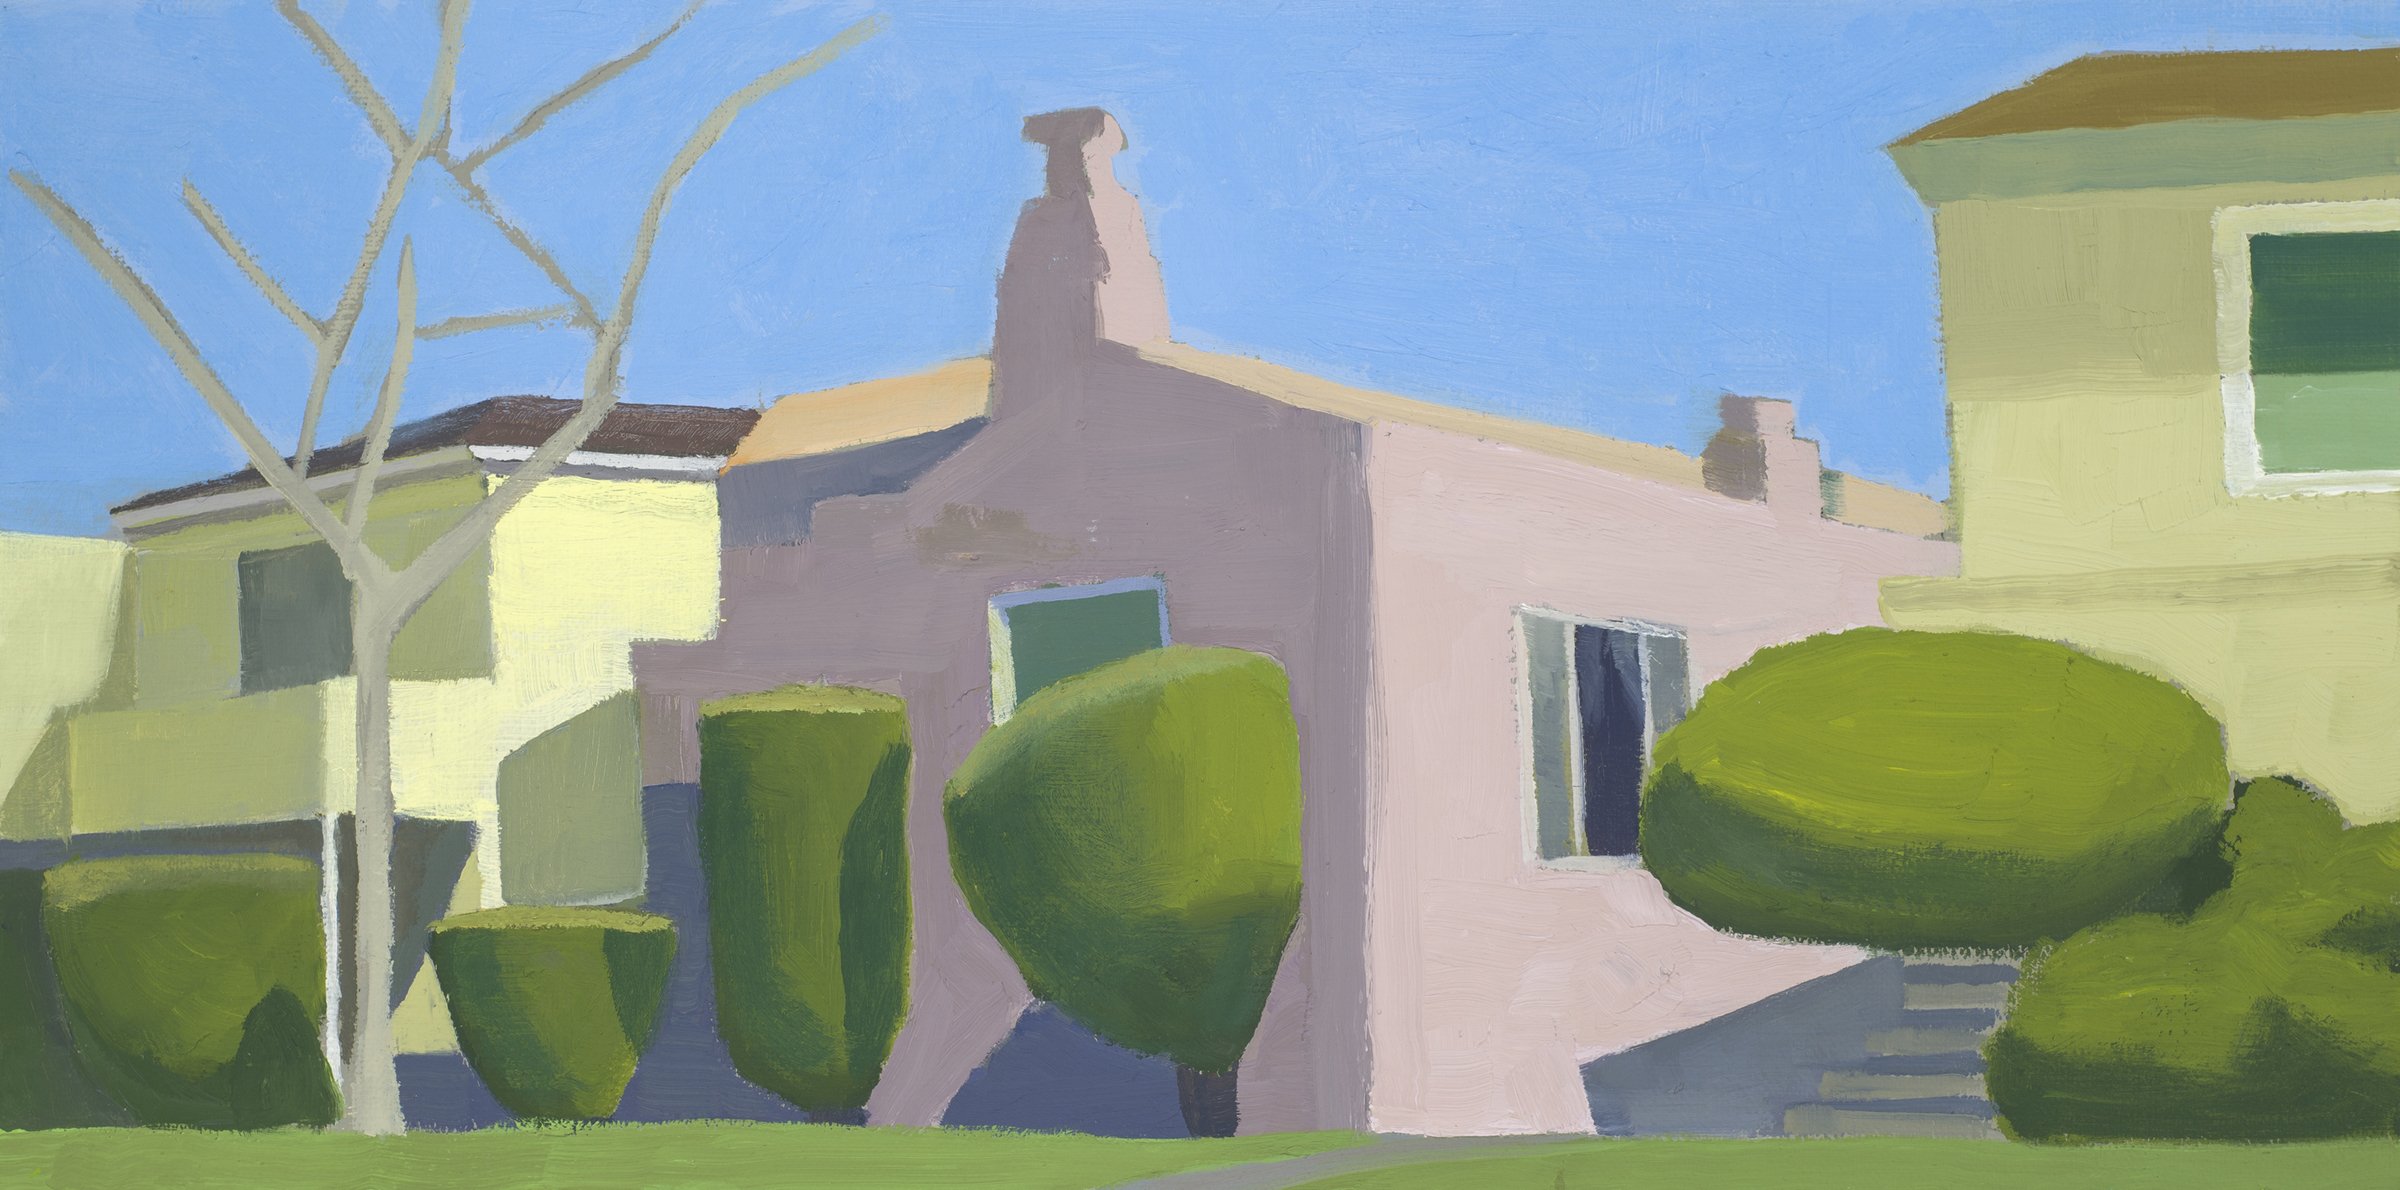 Return from SFO: 19th Ave 2 by Carla Roth